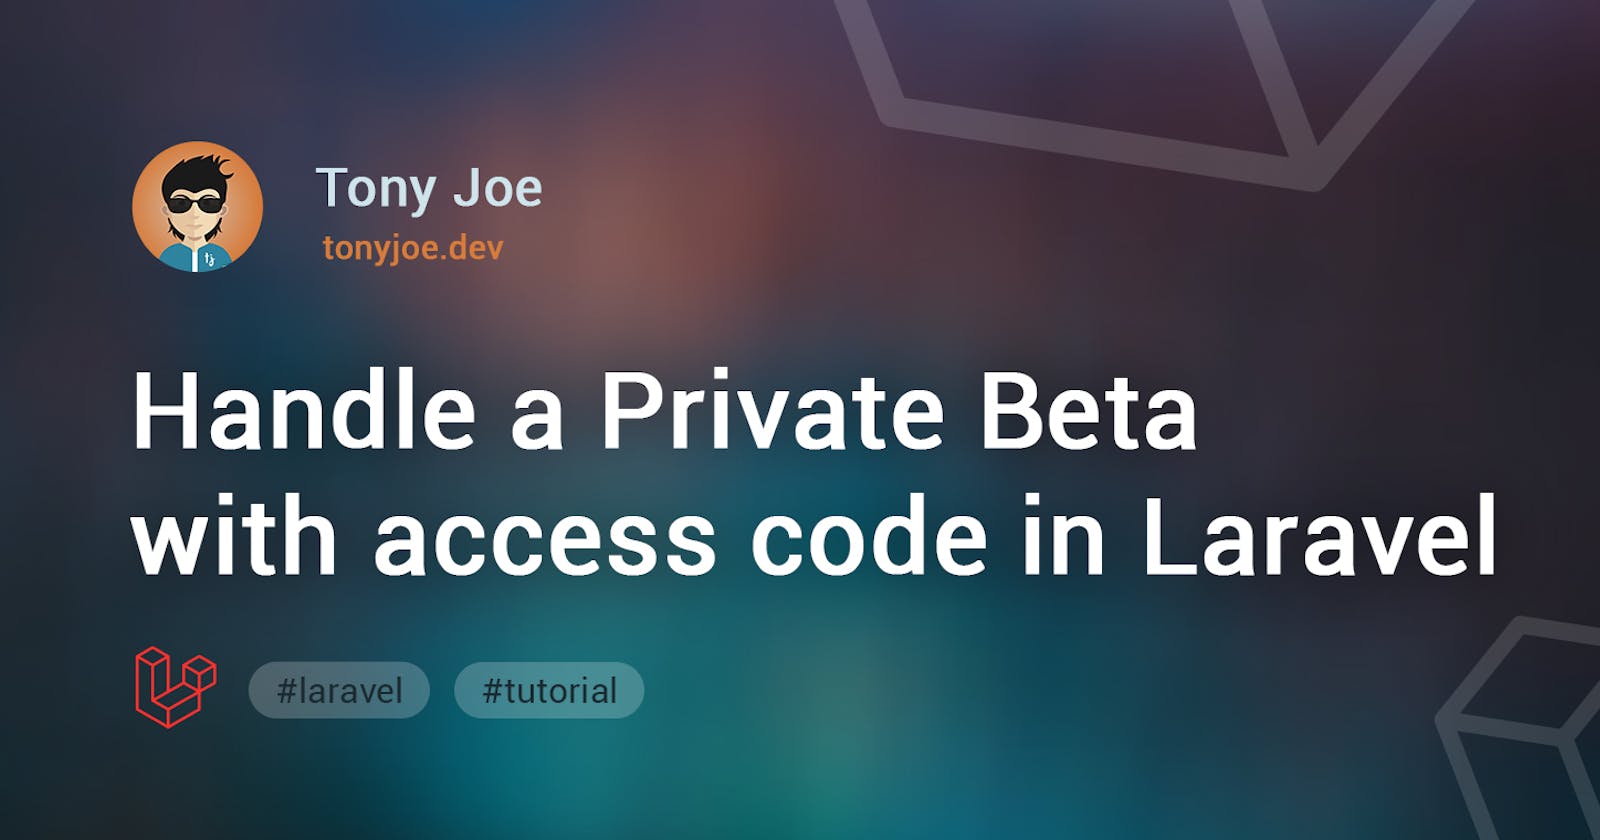 How to handle a Private Beta with access code for your new app in Laravel